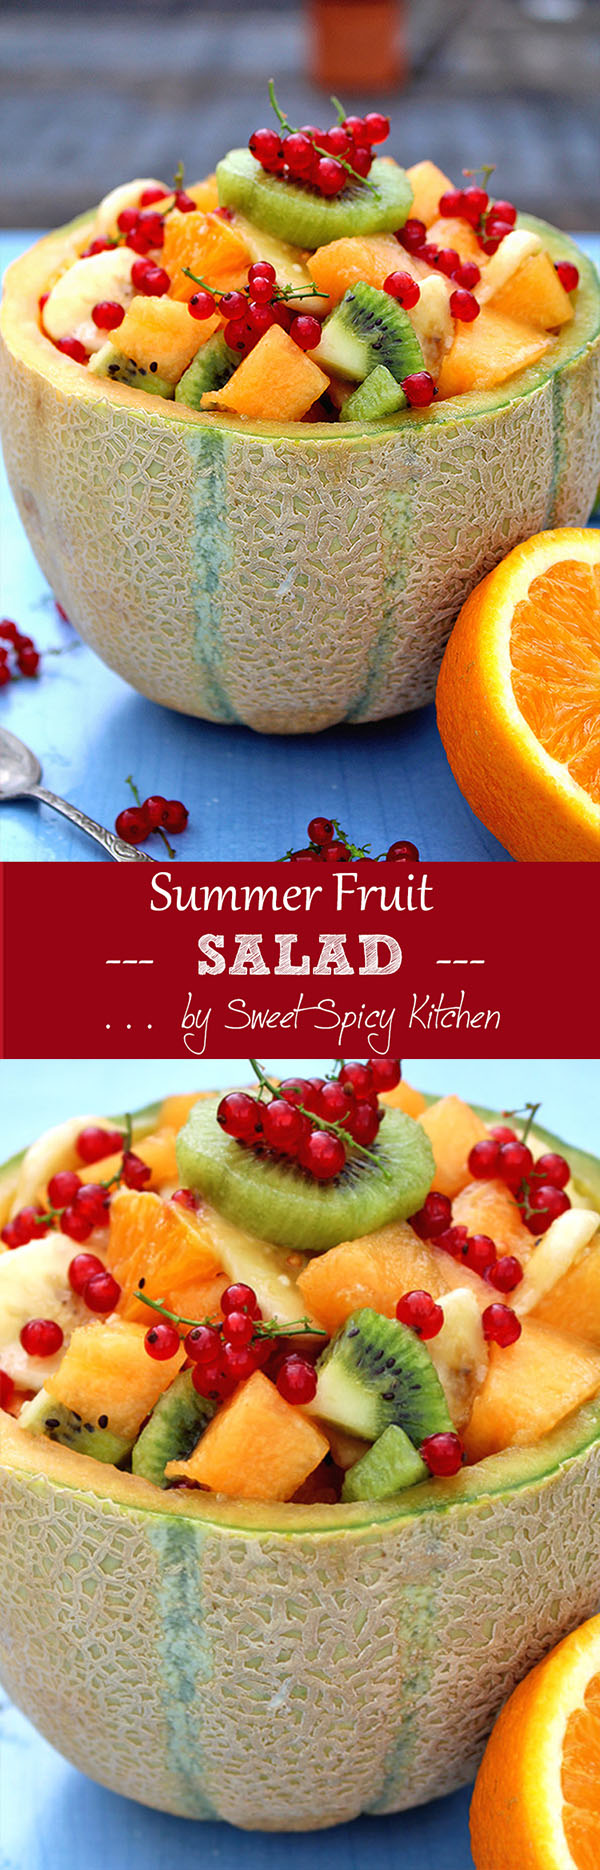 Refreshing Summer Fruit Salad enriched with melon, orange, kiwi, banana and currant. Drizzled with orange juice and honey. 